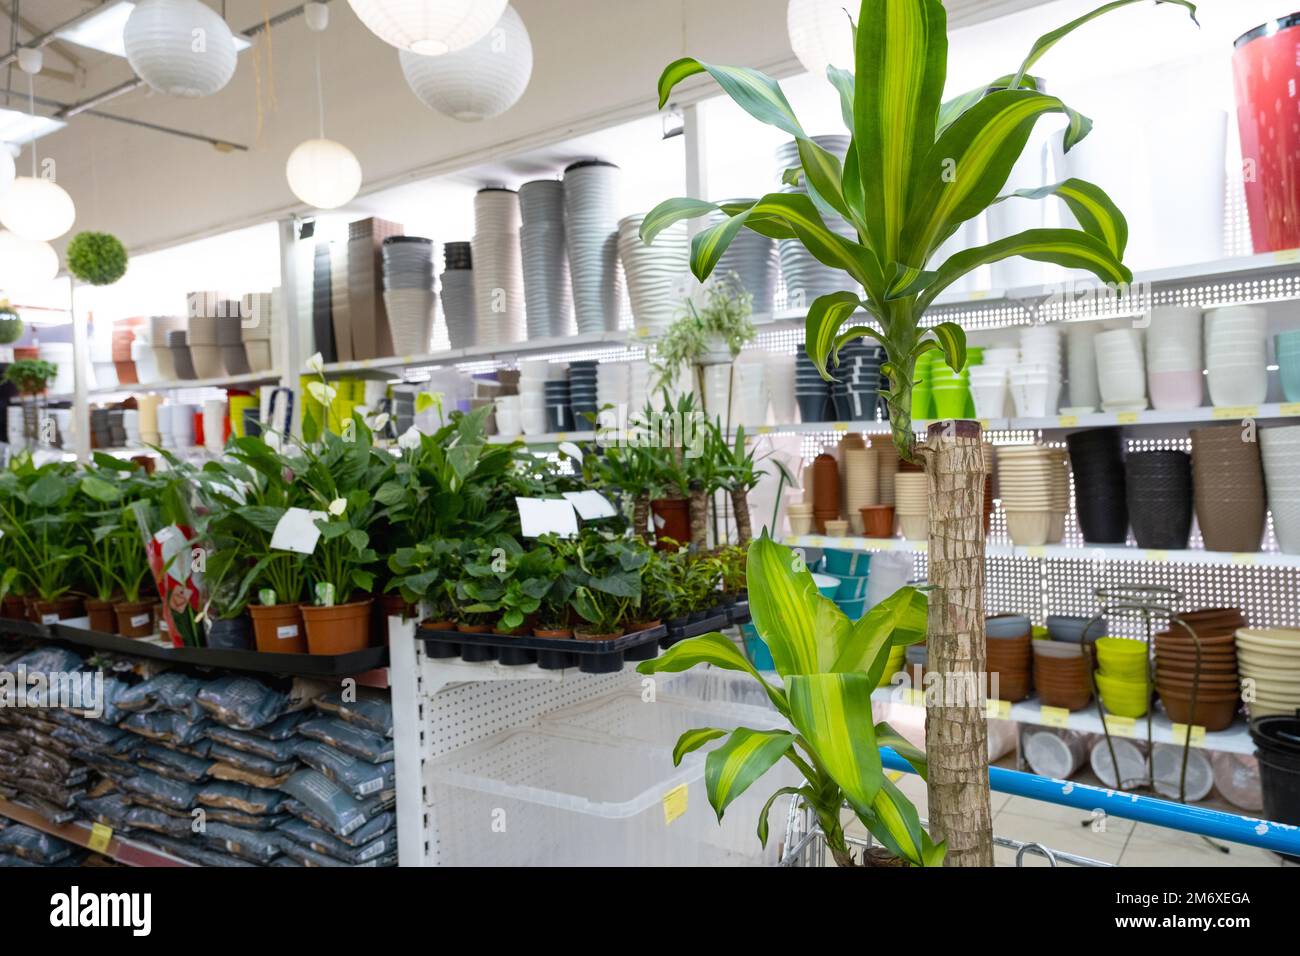 Potted plants in a flower shop cart - purchase of home plants for cultivation and care, as a gift Stock Photo